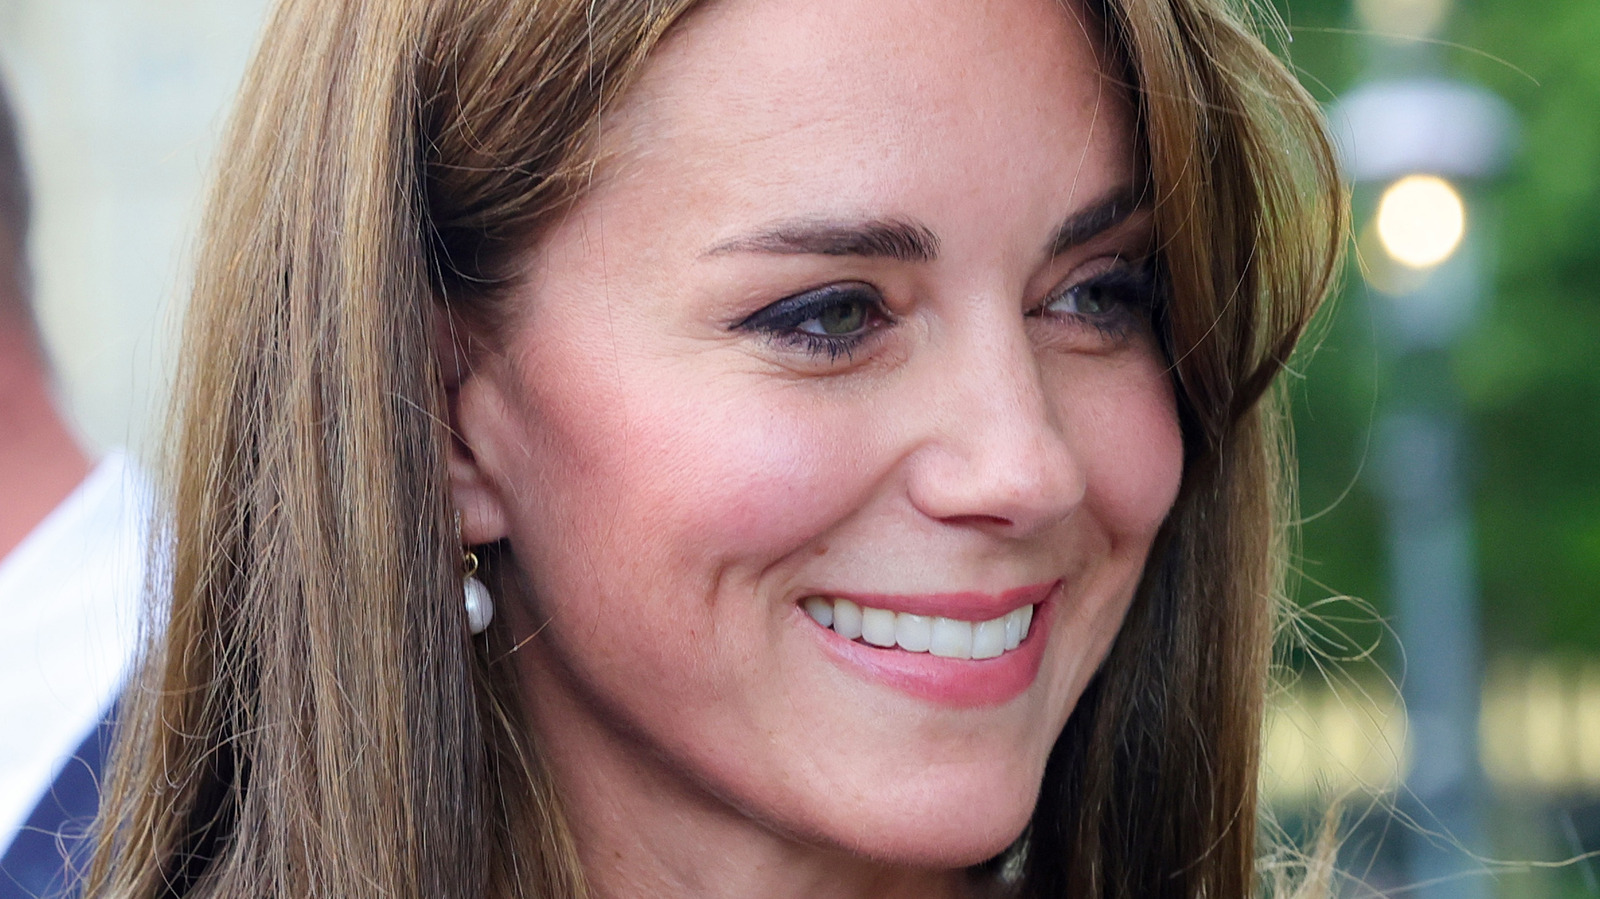 A Touching Moment Between Kate Middleton And A Young Girl Has Twitter In Tears 